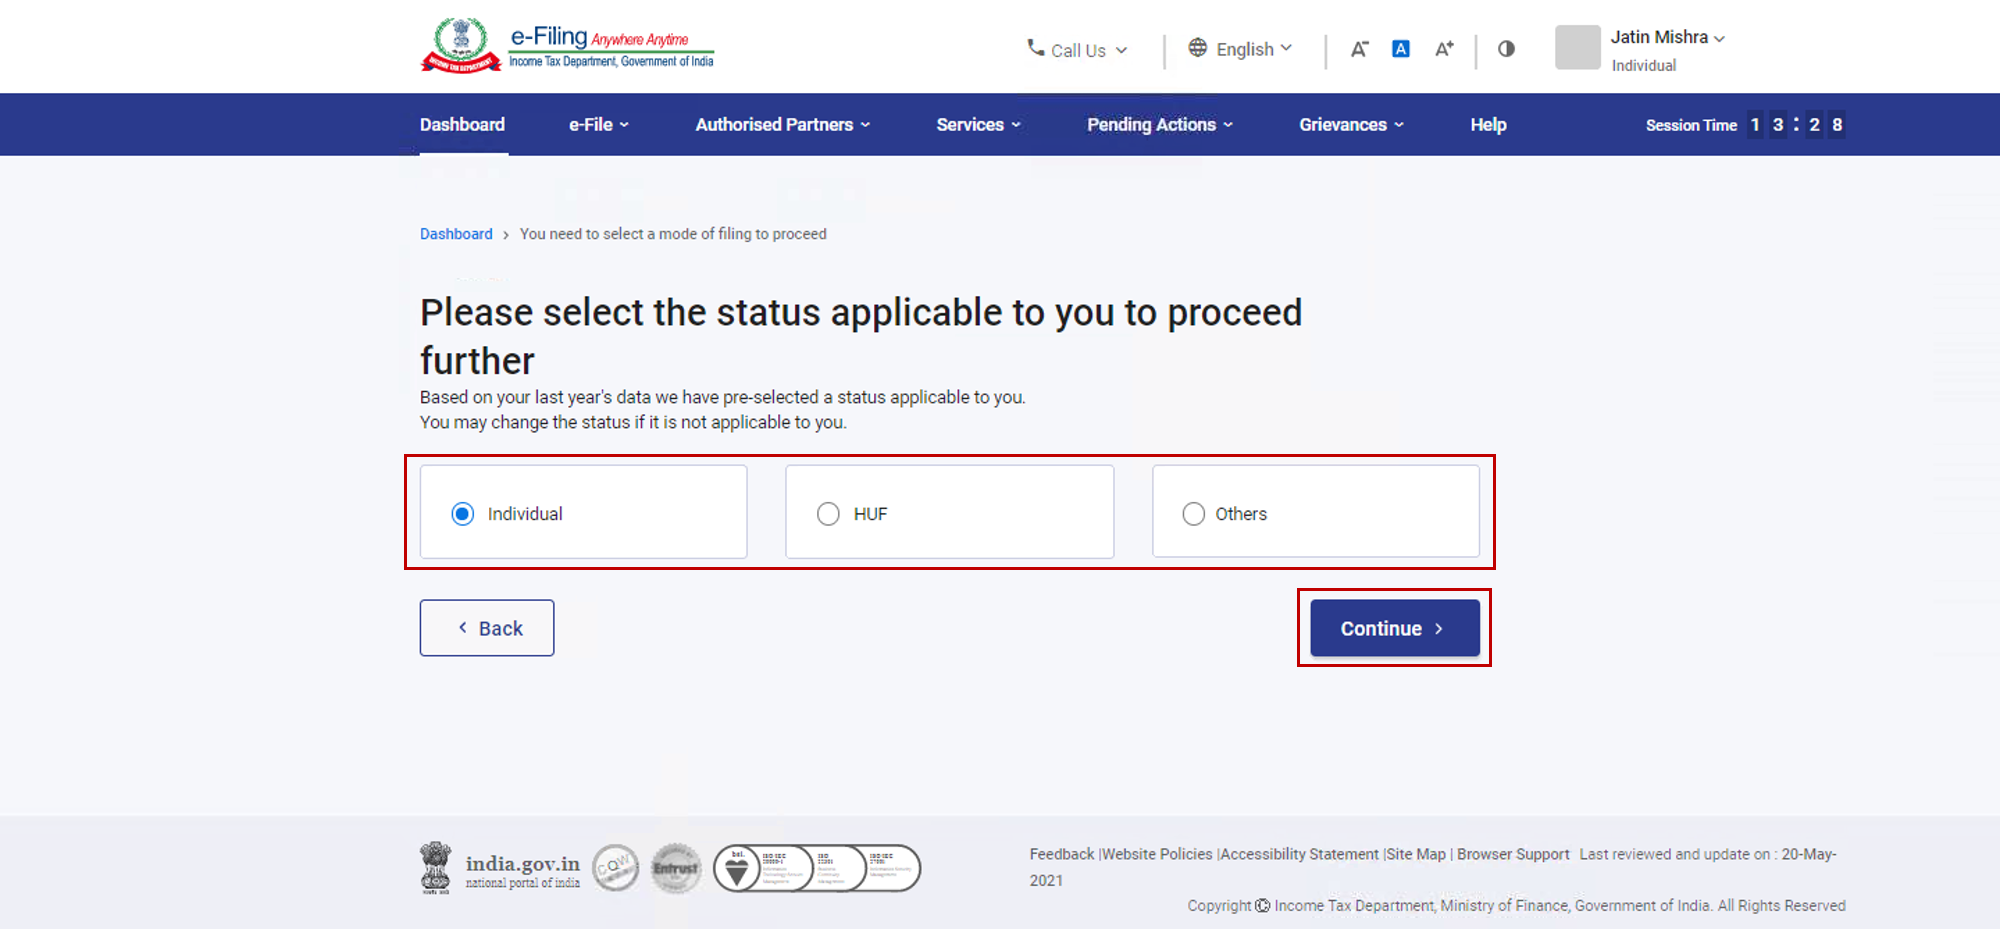 How to file Income Tax Return 2021-22 in the New Income Tax Portal?